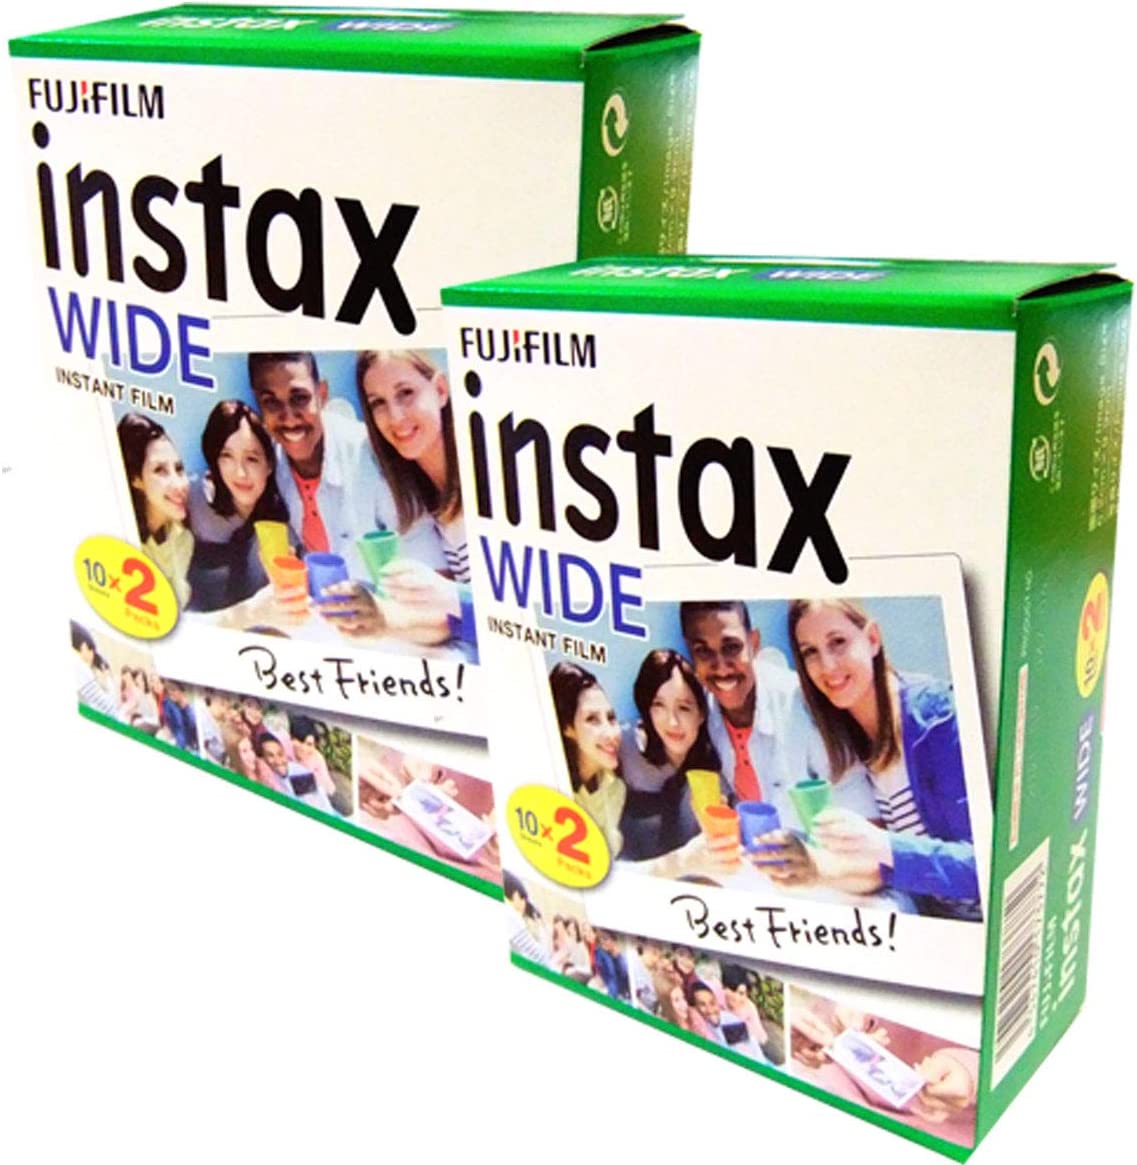 Product Image of 2 x Fuji Instax Wide Film for Fujifilm 300 210 200 100 Instant Cameras